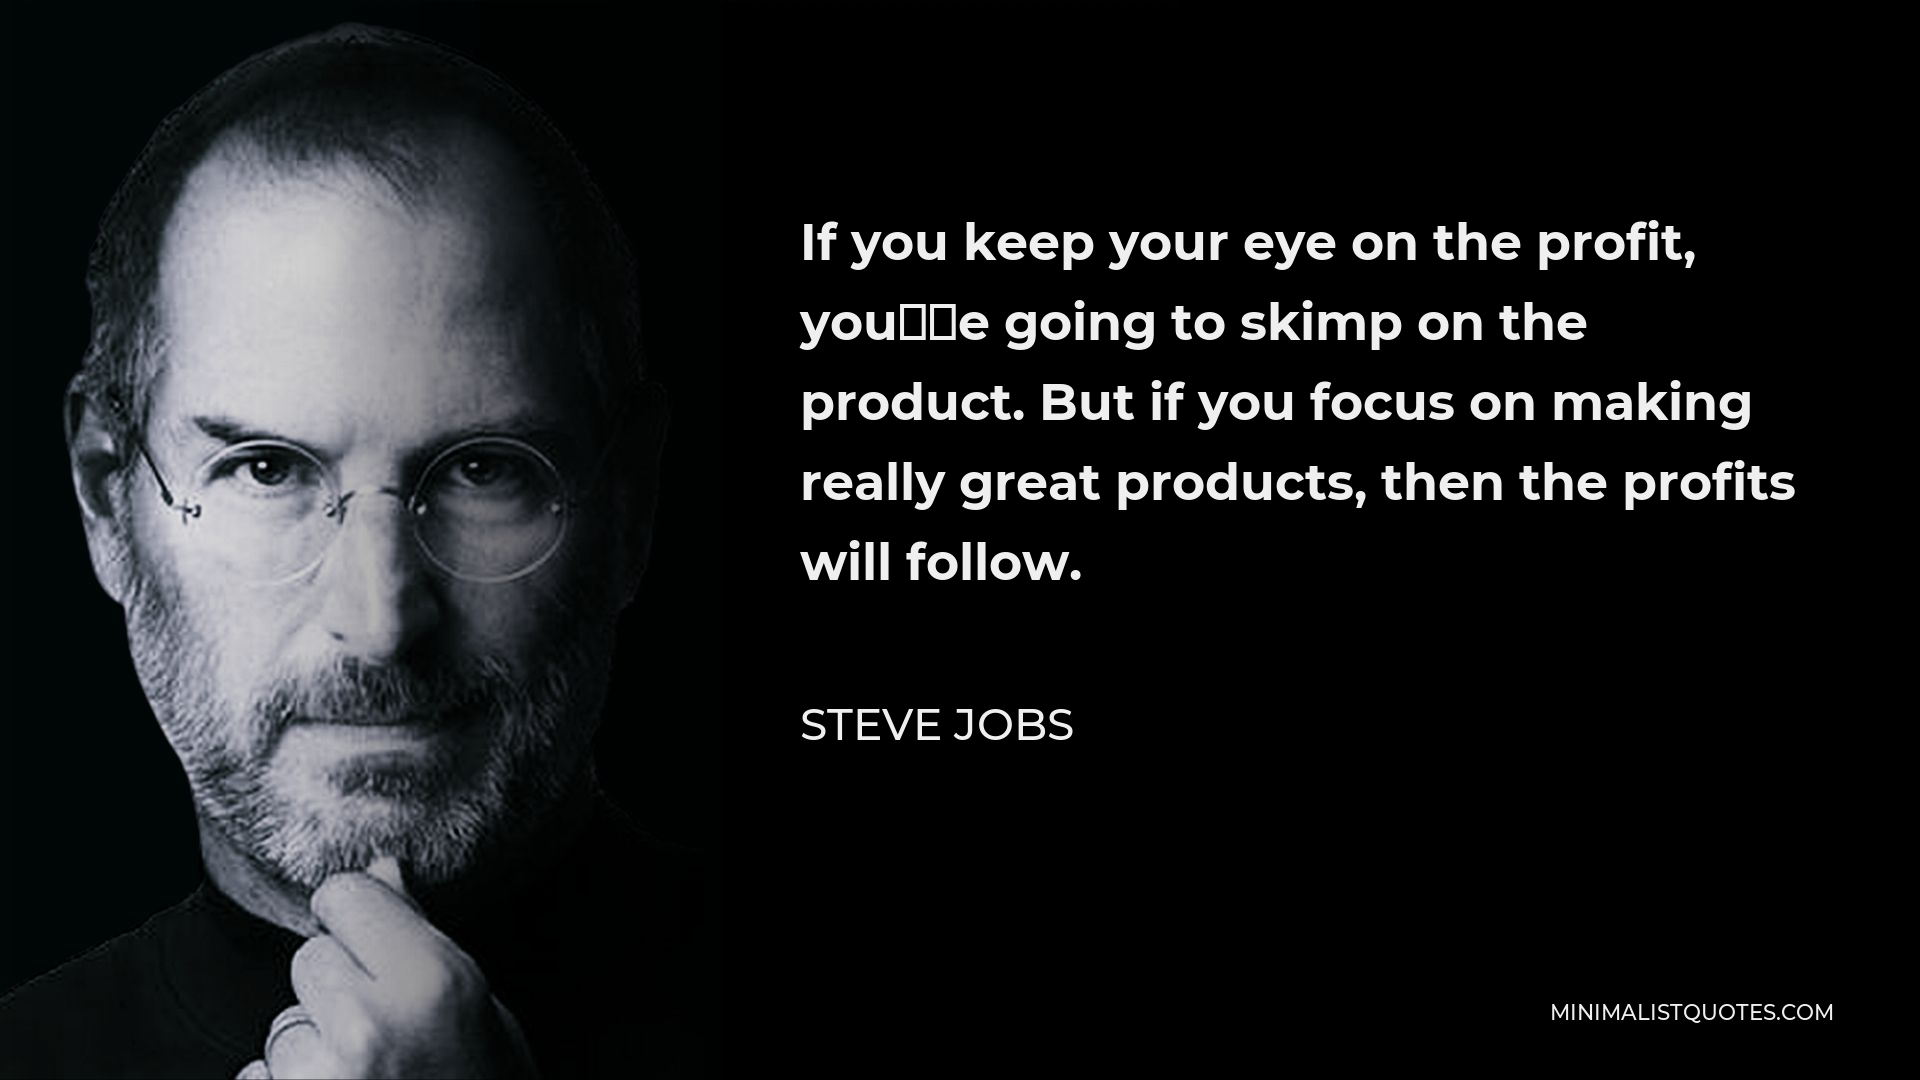 Steve Jobs Quote - If you keep your eye on the profit, you’re going to skimp on the product. But if you focus on making really great products, then the profits will follow.